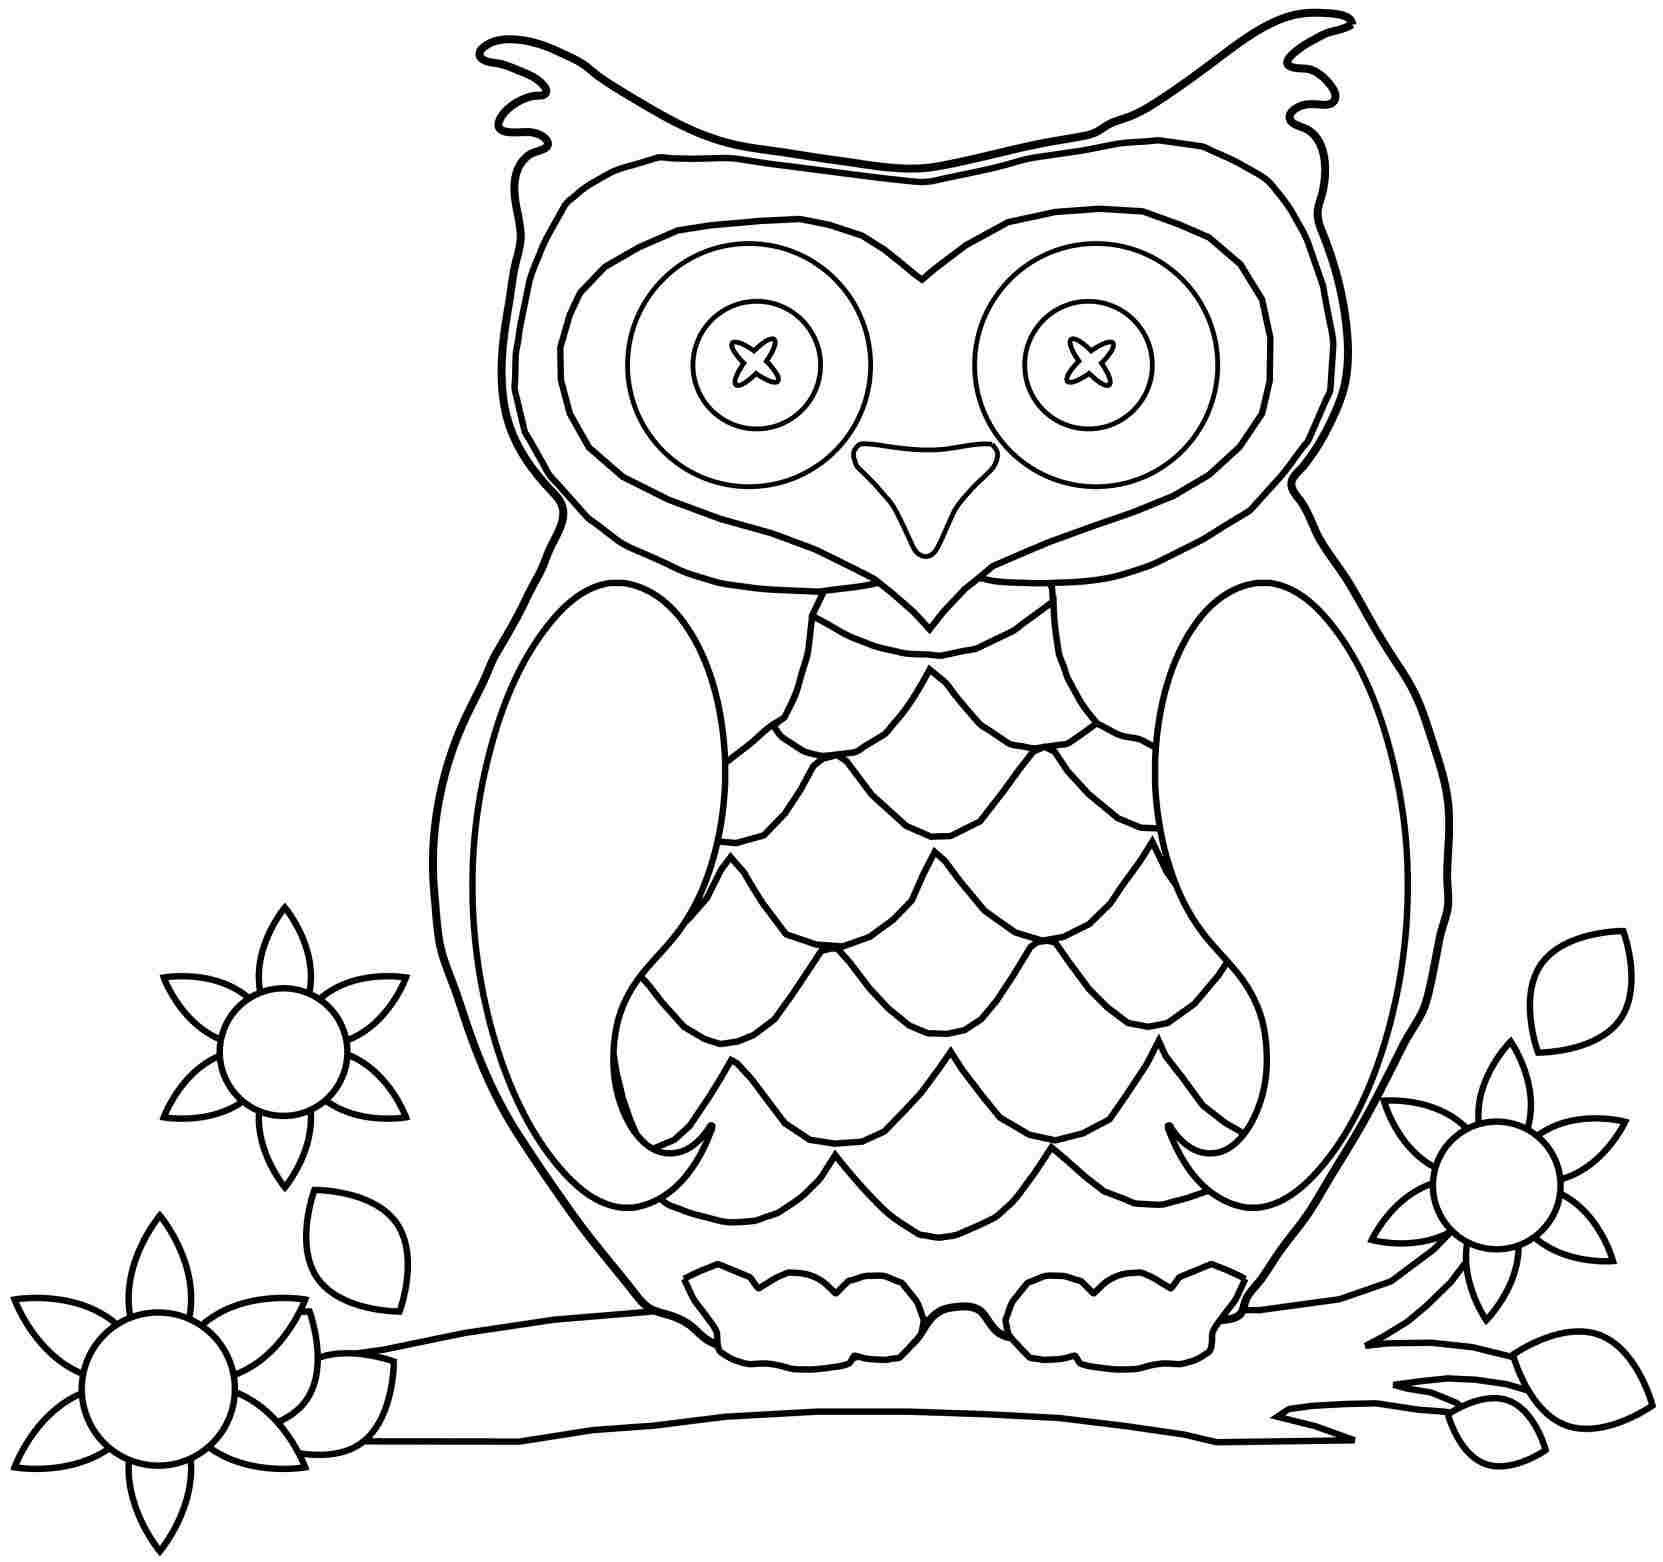 Coloring Pages For Kindergarten Boys
 Free Preschool Fall Coloring Pages